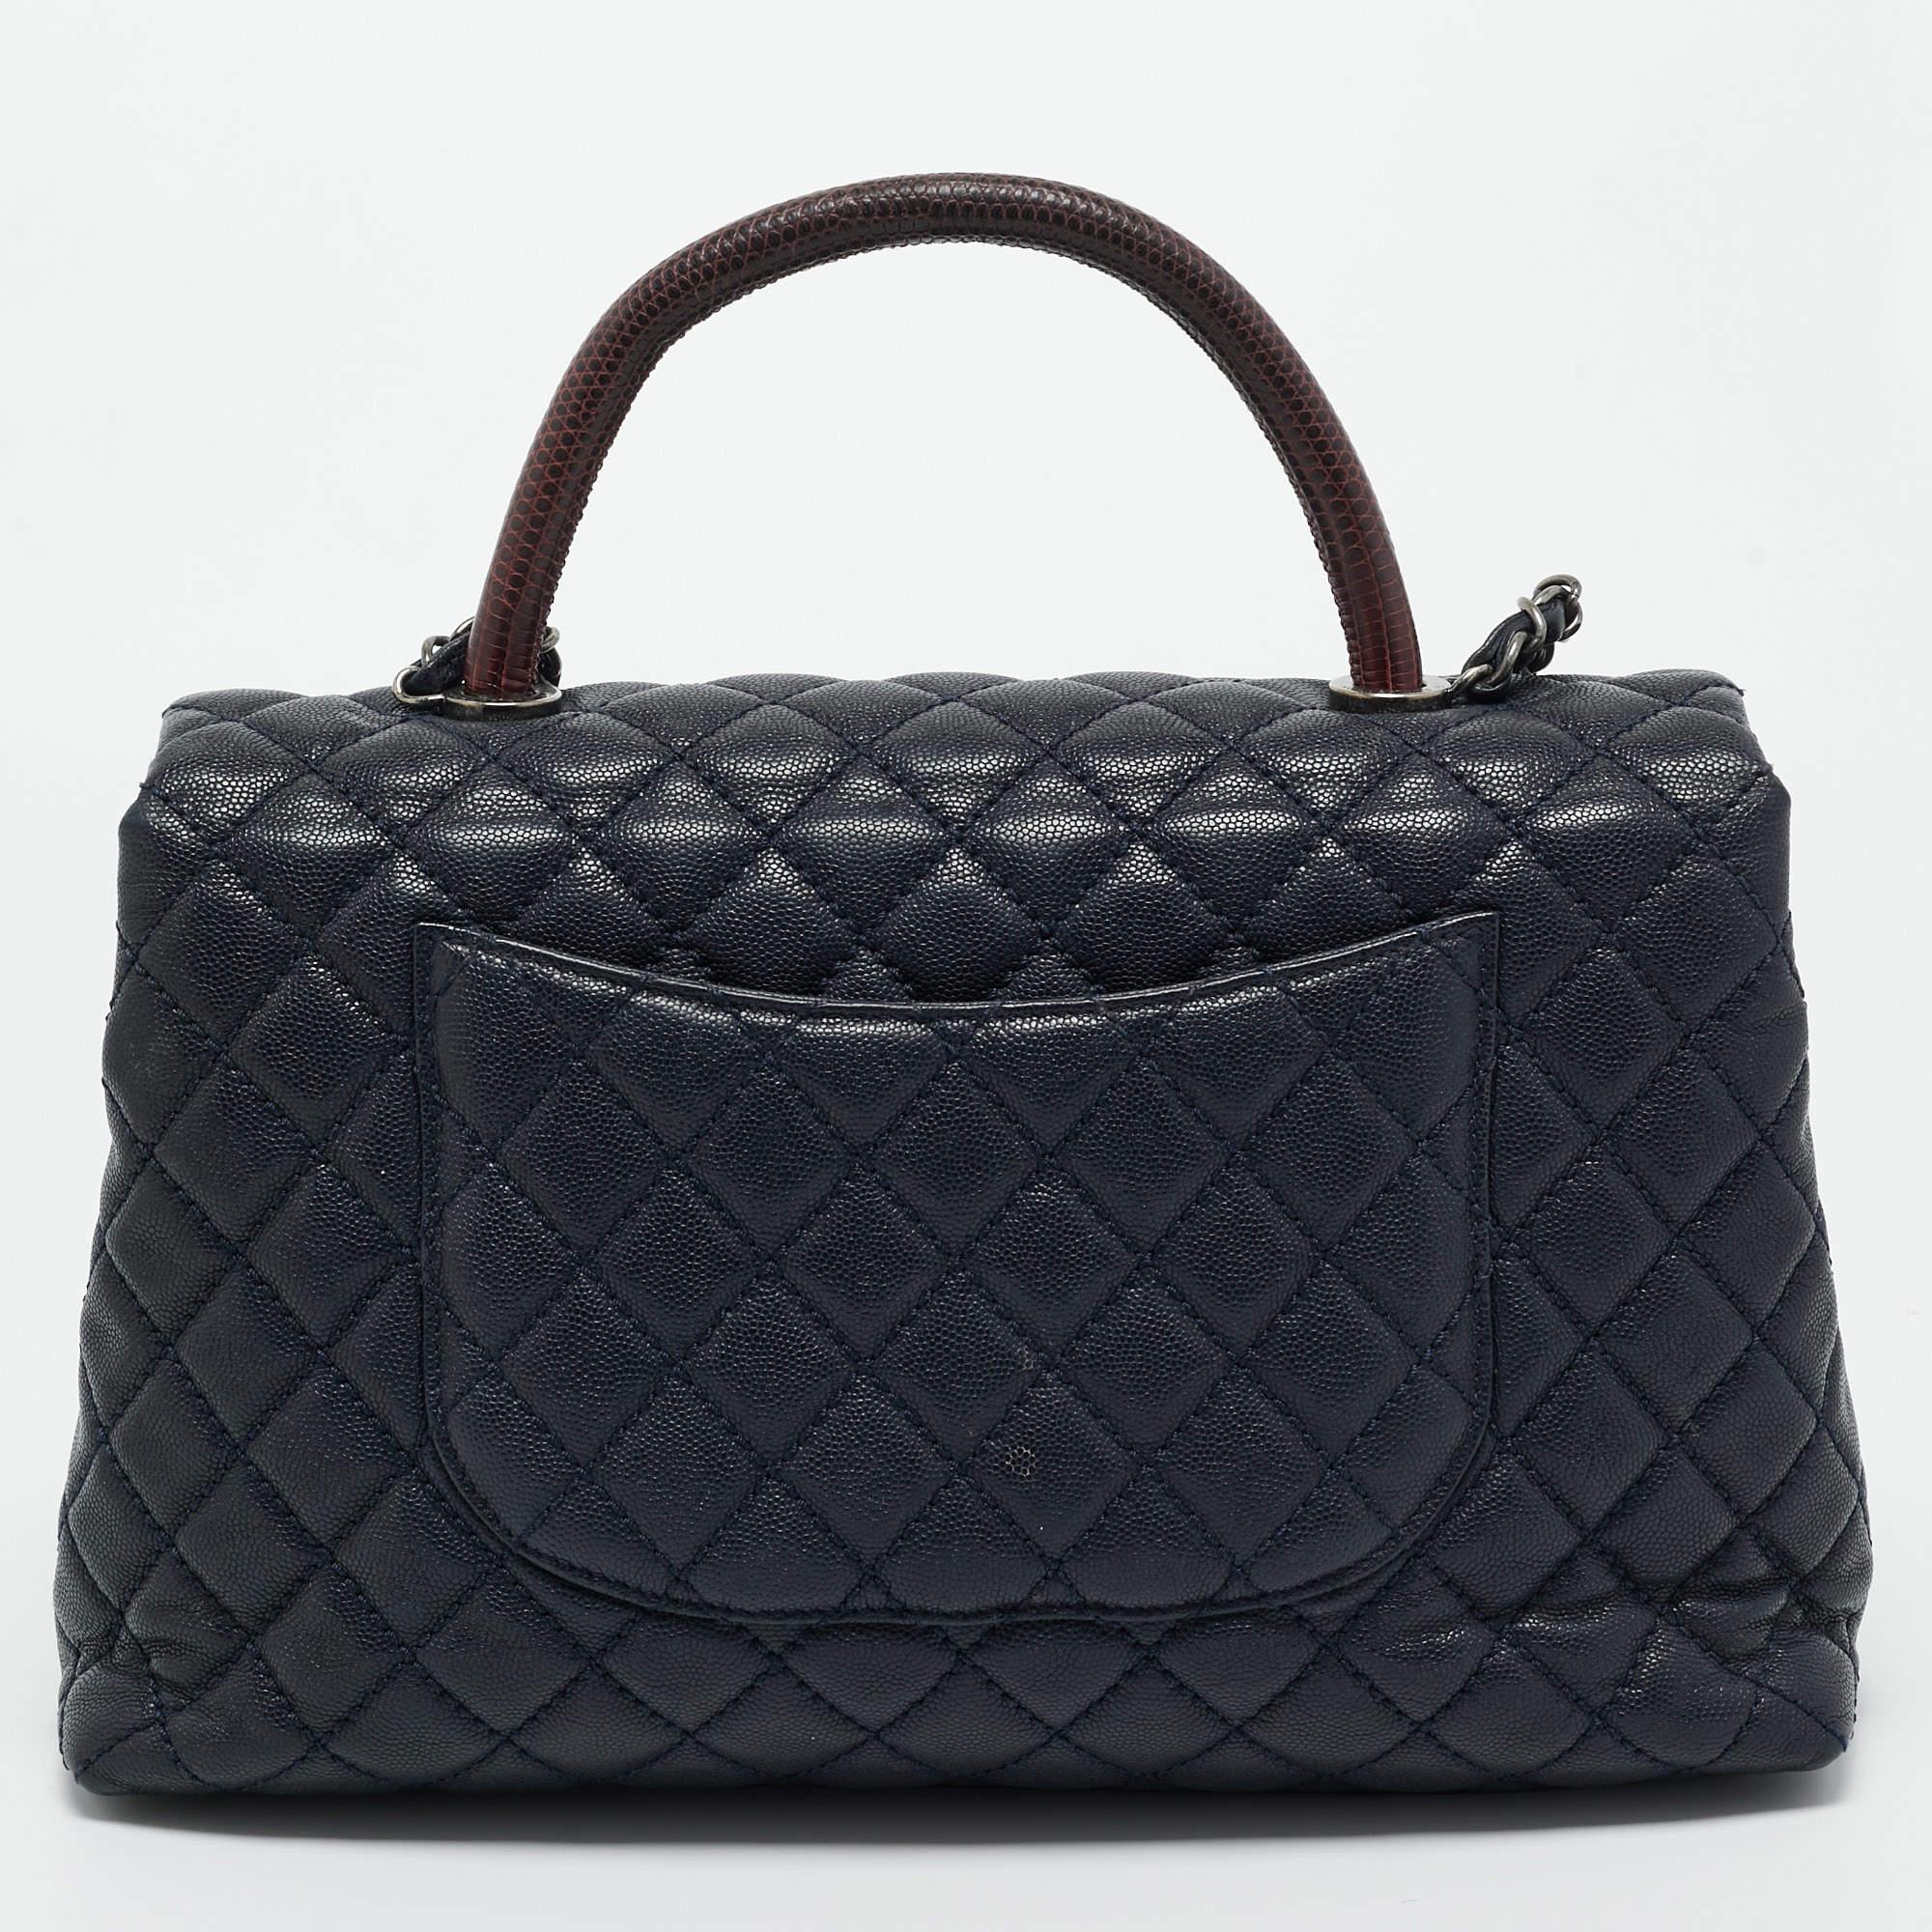 Chanel Dark Blue/Burgundy Quilted Caviar Leather and Lizard Large Coco Top Handl For Sale 1